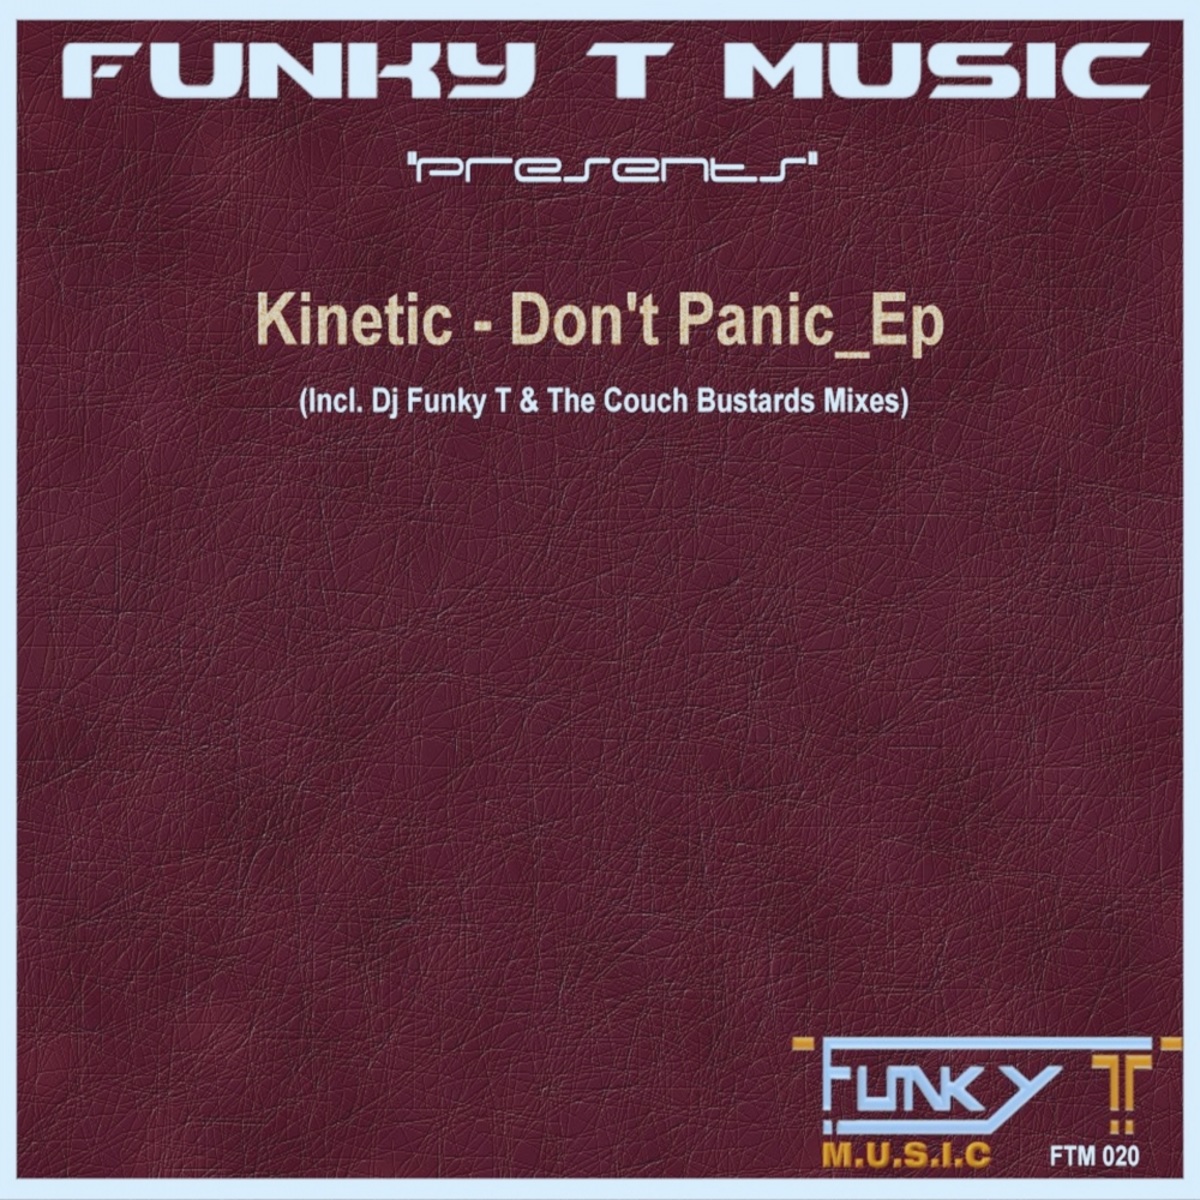 Kinetic - Don't Panic_Ep / Funky T Music